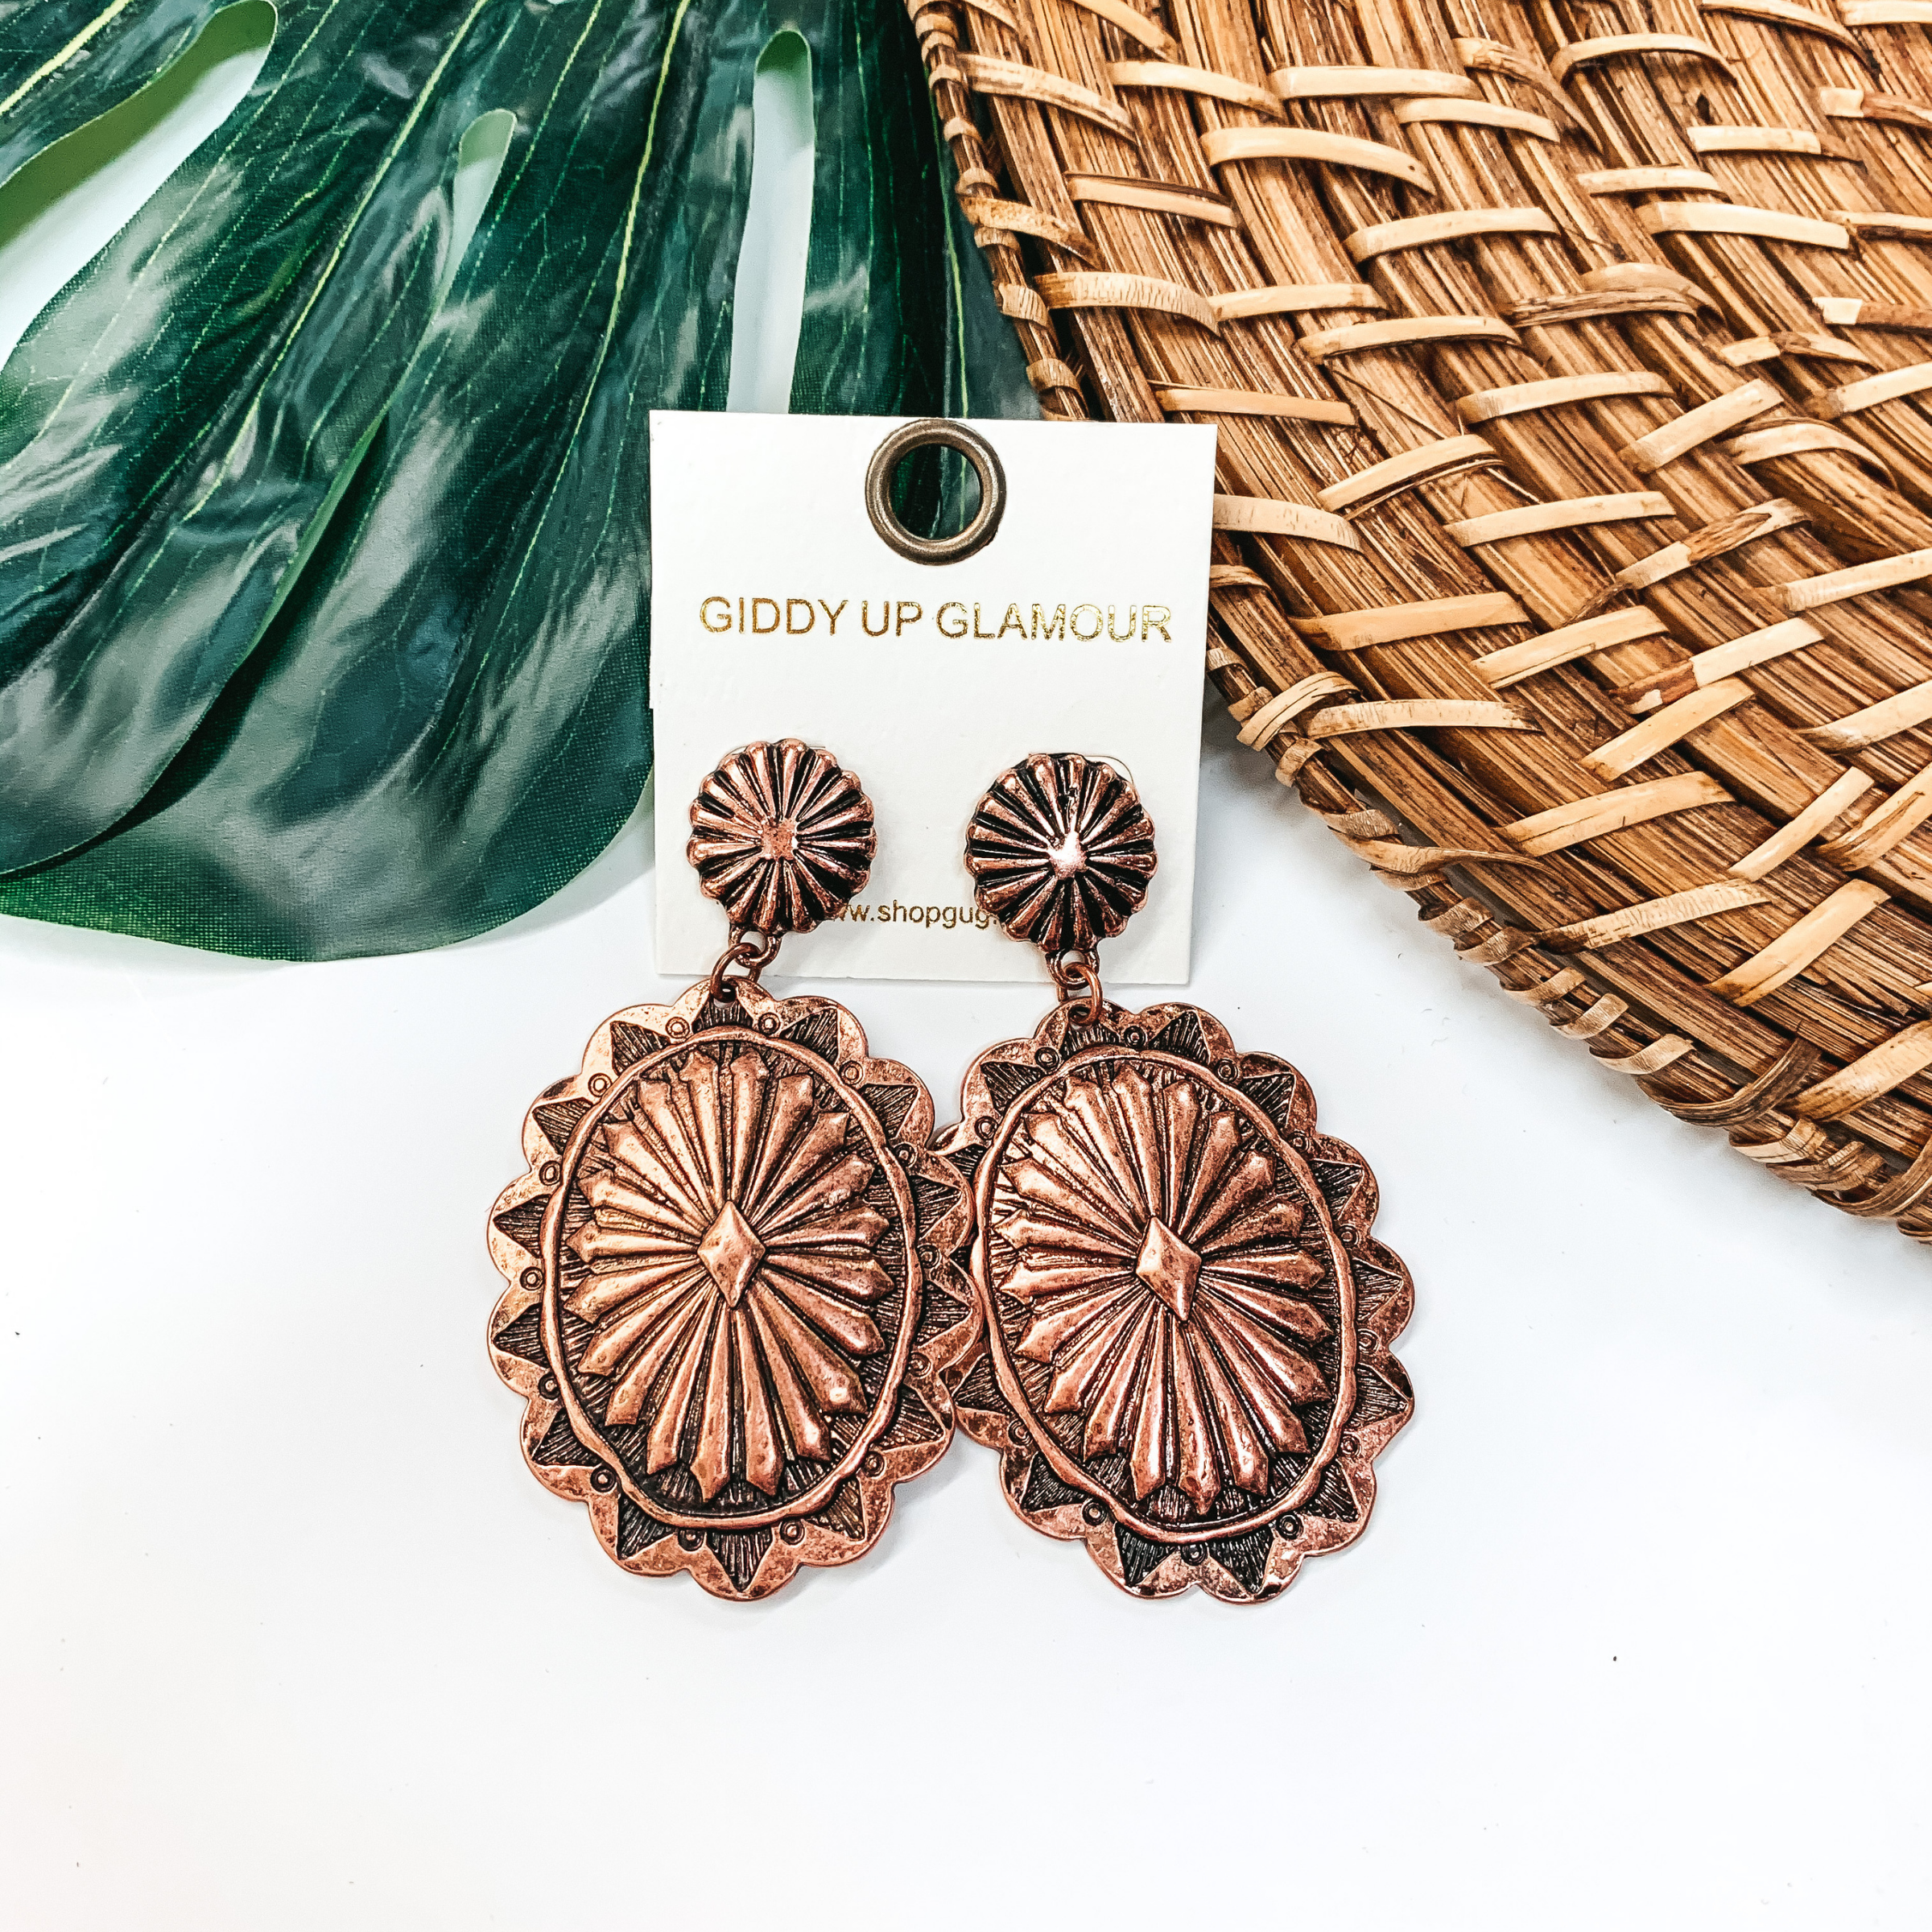 Oval Concho Post Earrings in Copper Tone - Giddy Up Glamour Boutique